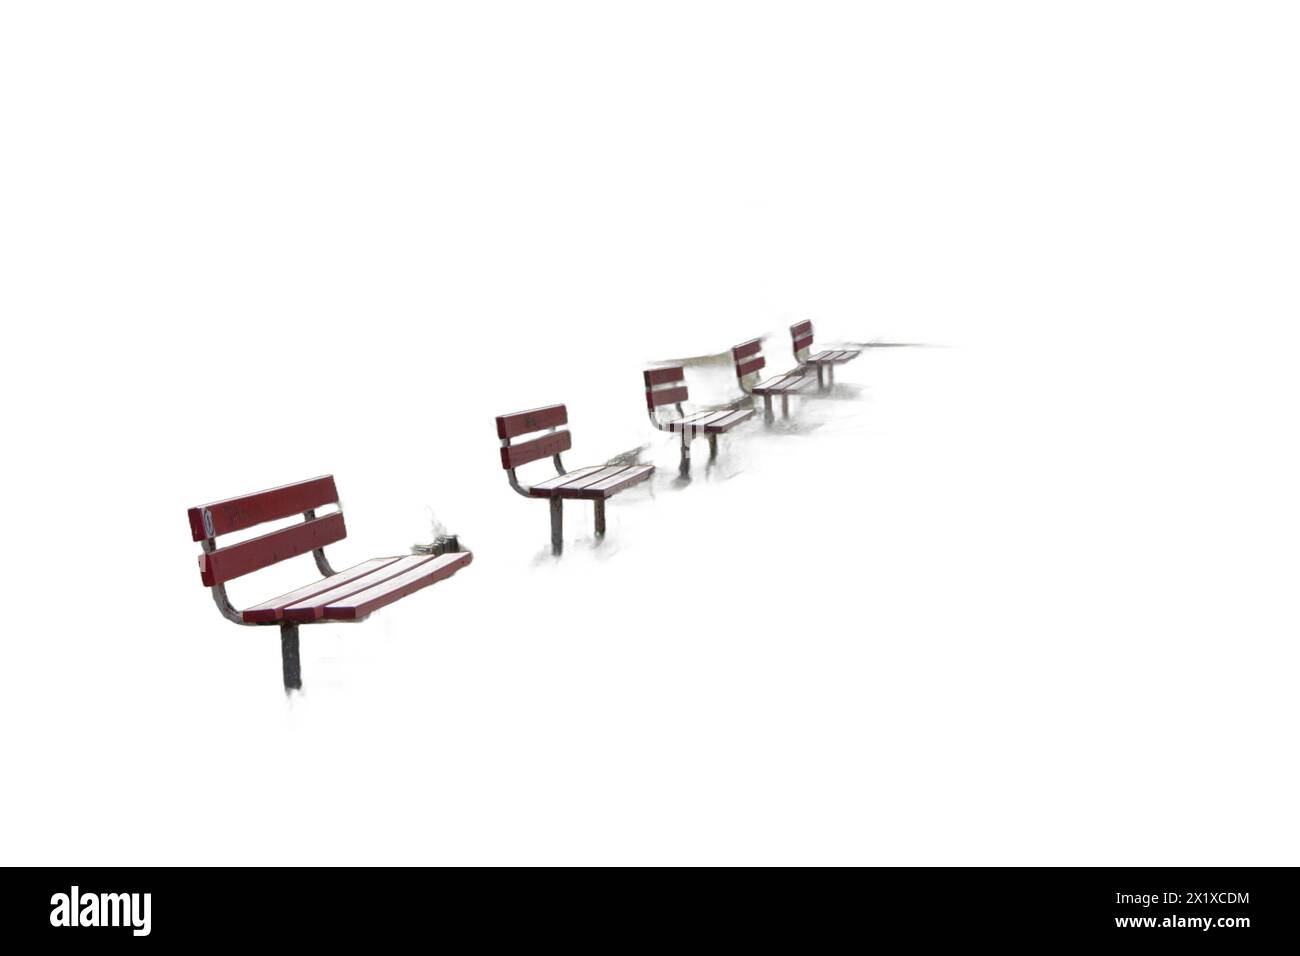 Isolated image featuring a row of benches, perfect for park scenes, urban landscapes, and outdoor designs Stock Photo